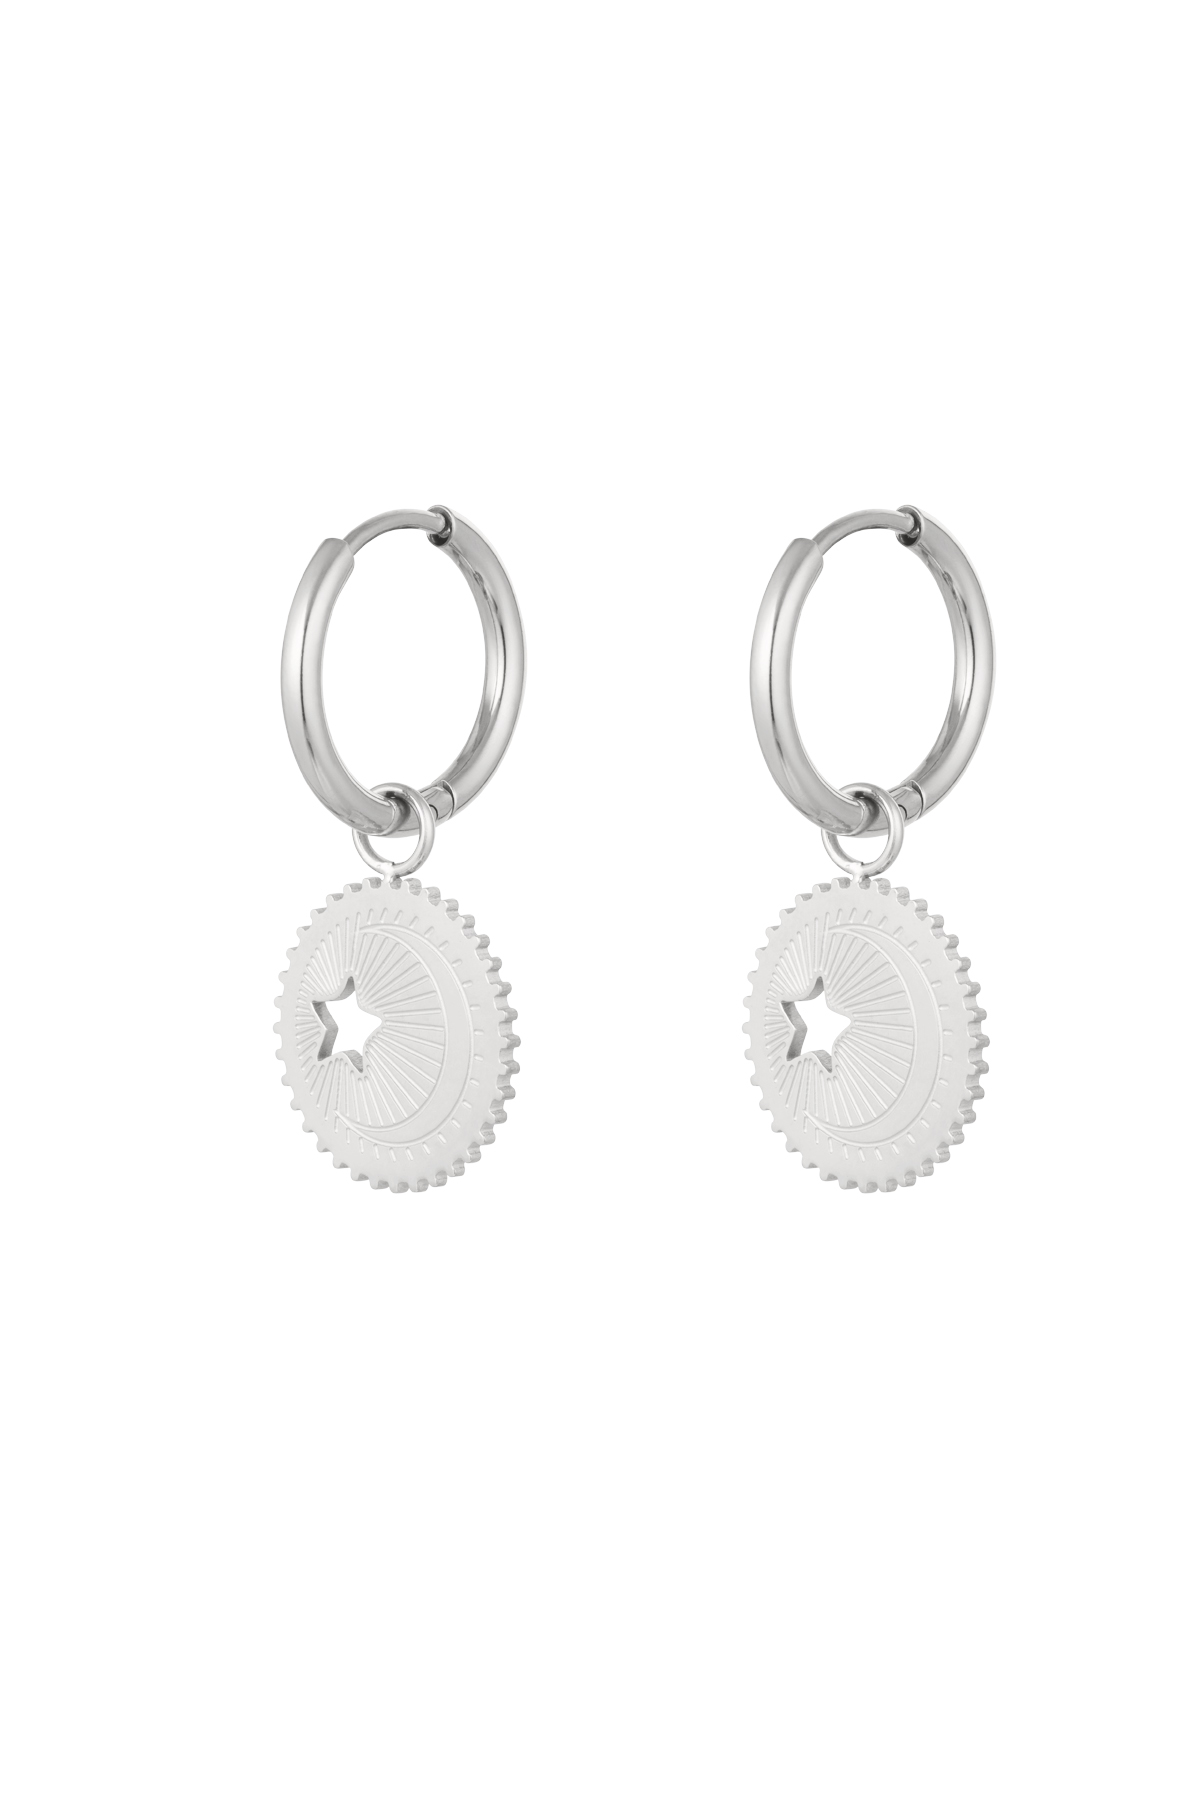 Earrings star coin - silver Stainless Steel 